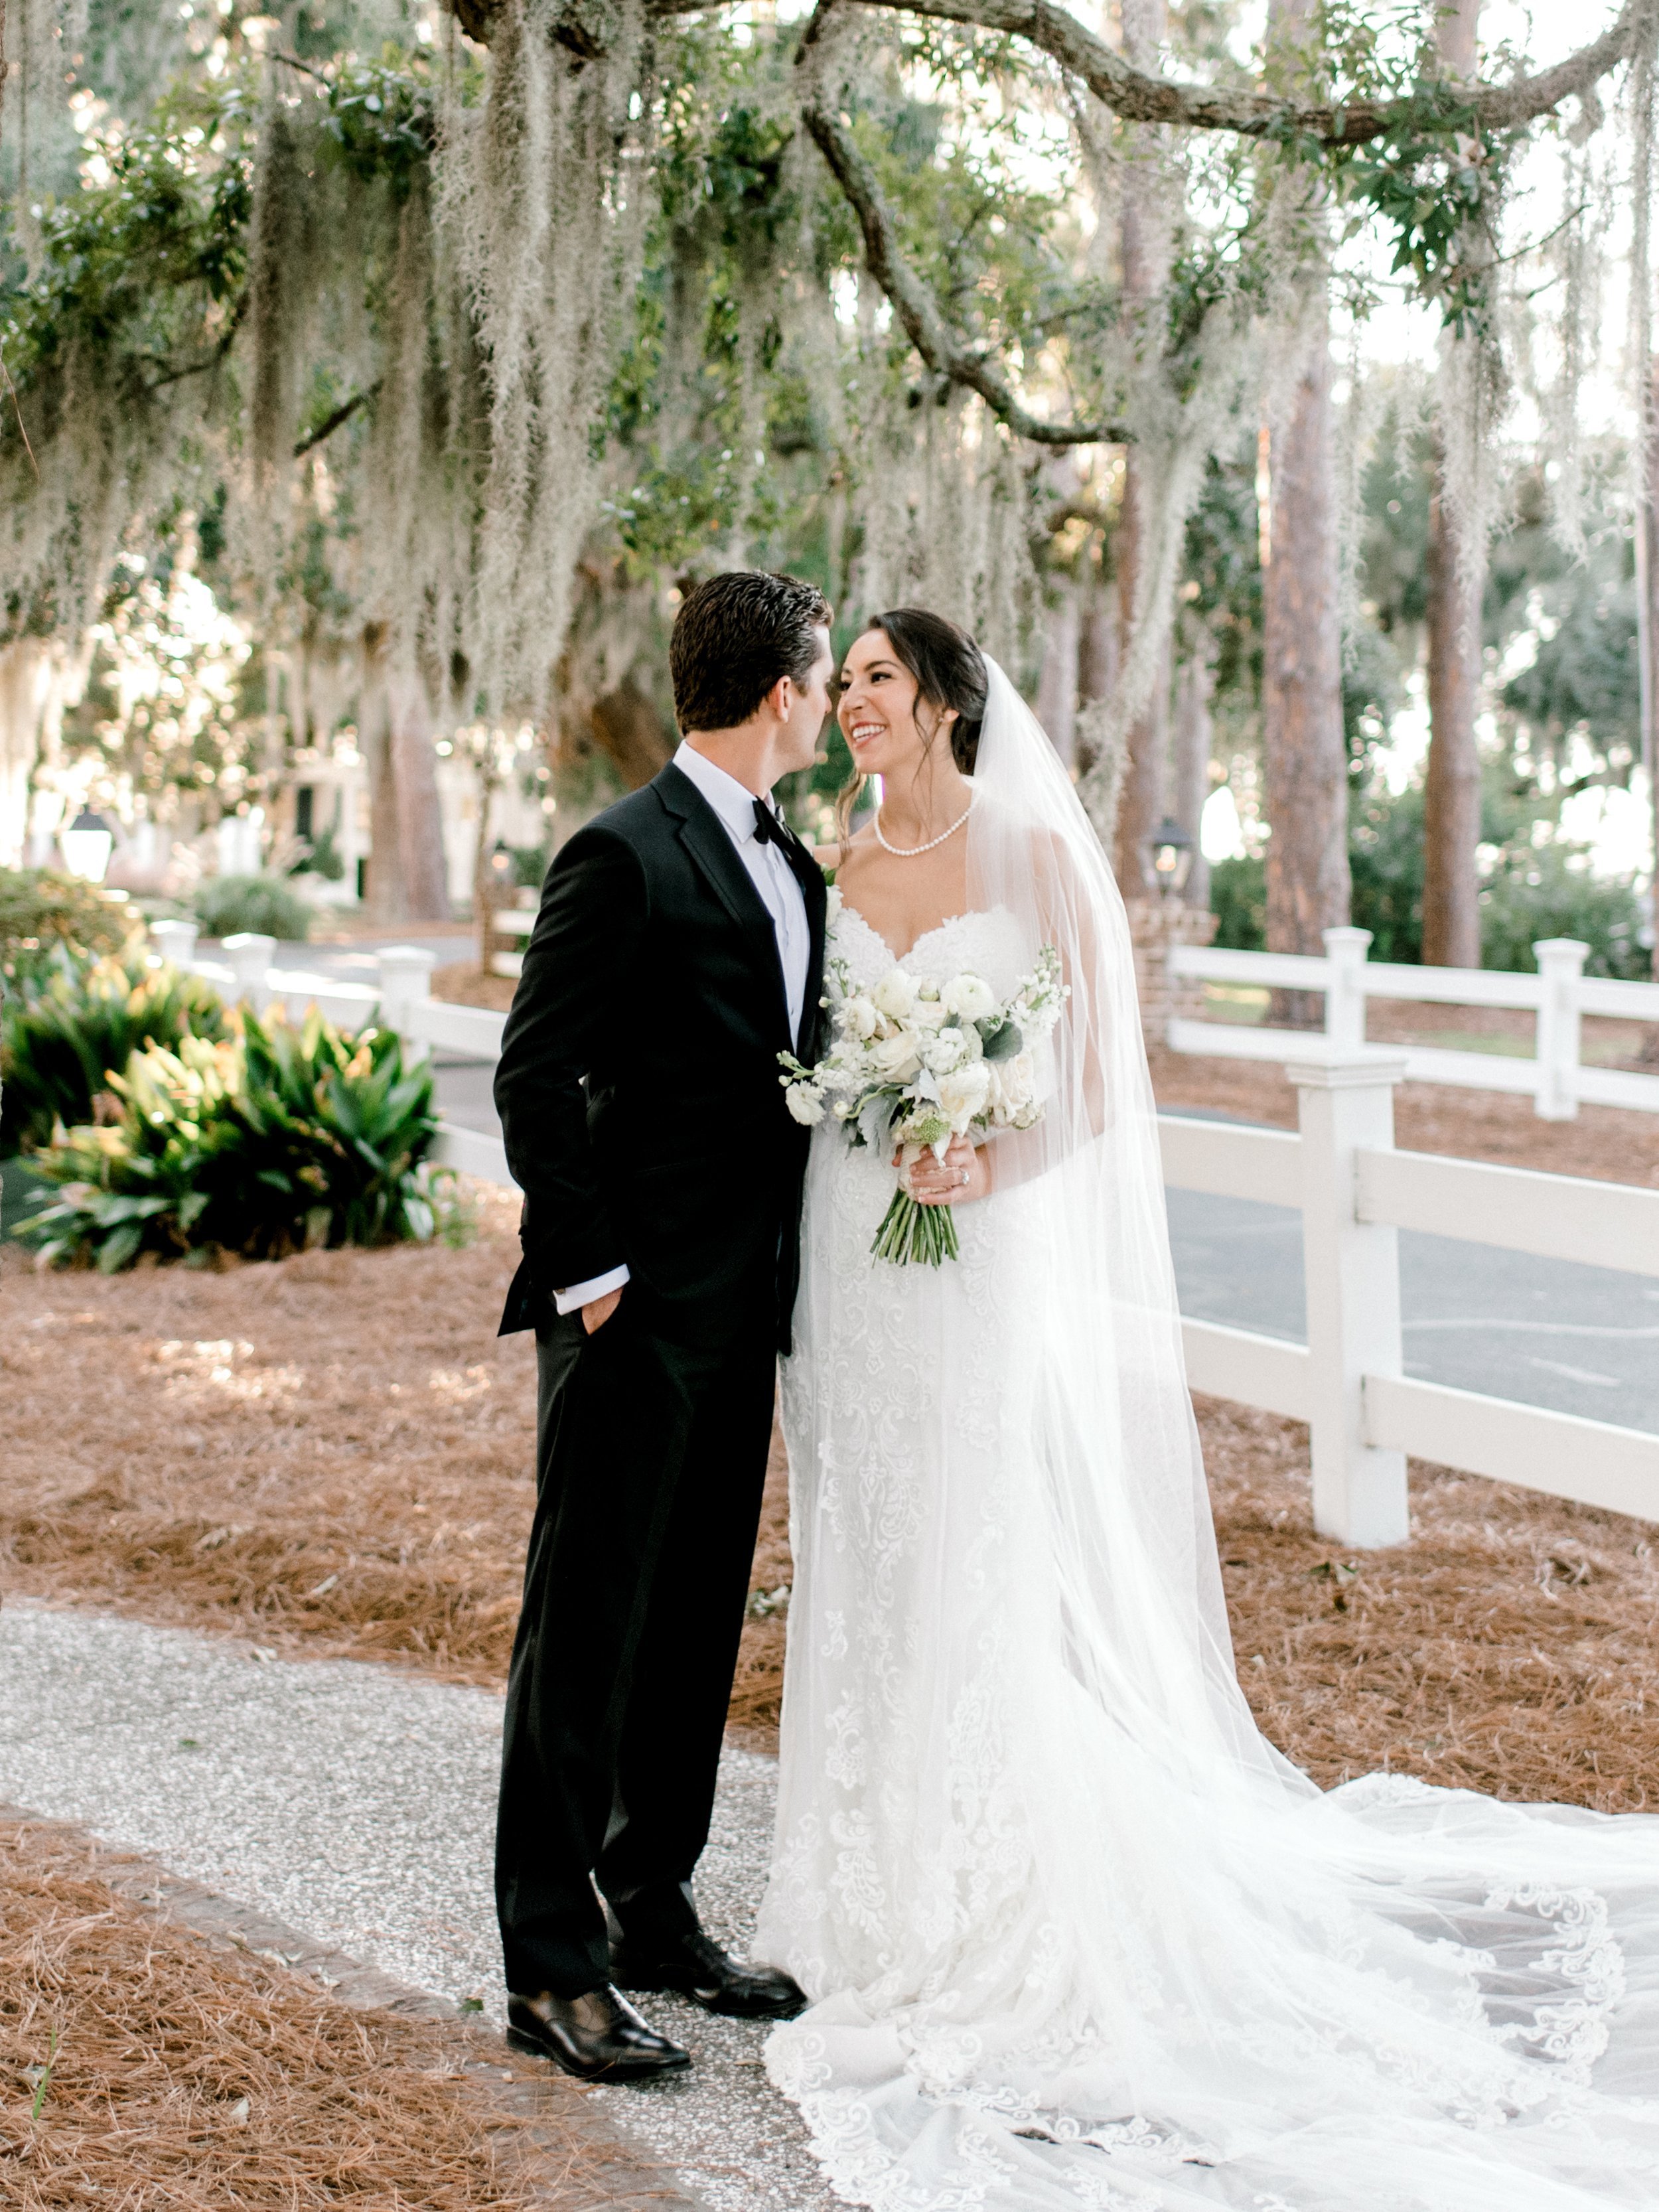 ivory-and-beau-blog-down-for-the-gown-grayson-real-bride-real-wedding-blog-southern-bride-maggie-sottero-wedding-dress-bridal-gown-wedding-gown-bridal-shop-bridal-boutique-savannah-georgia-Pinyan_0830.jpg